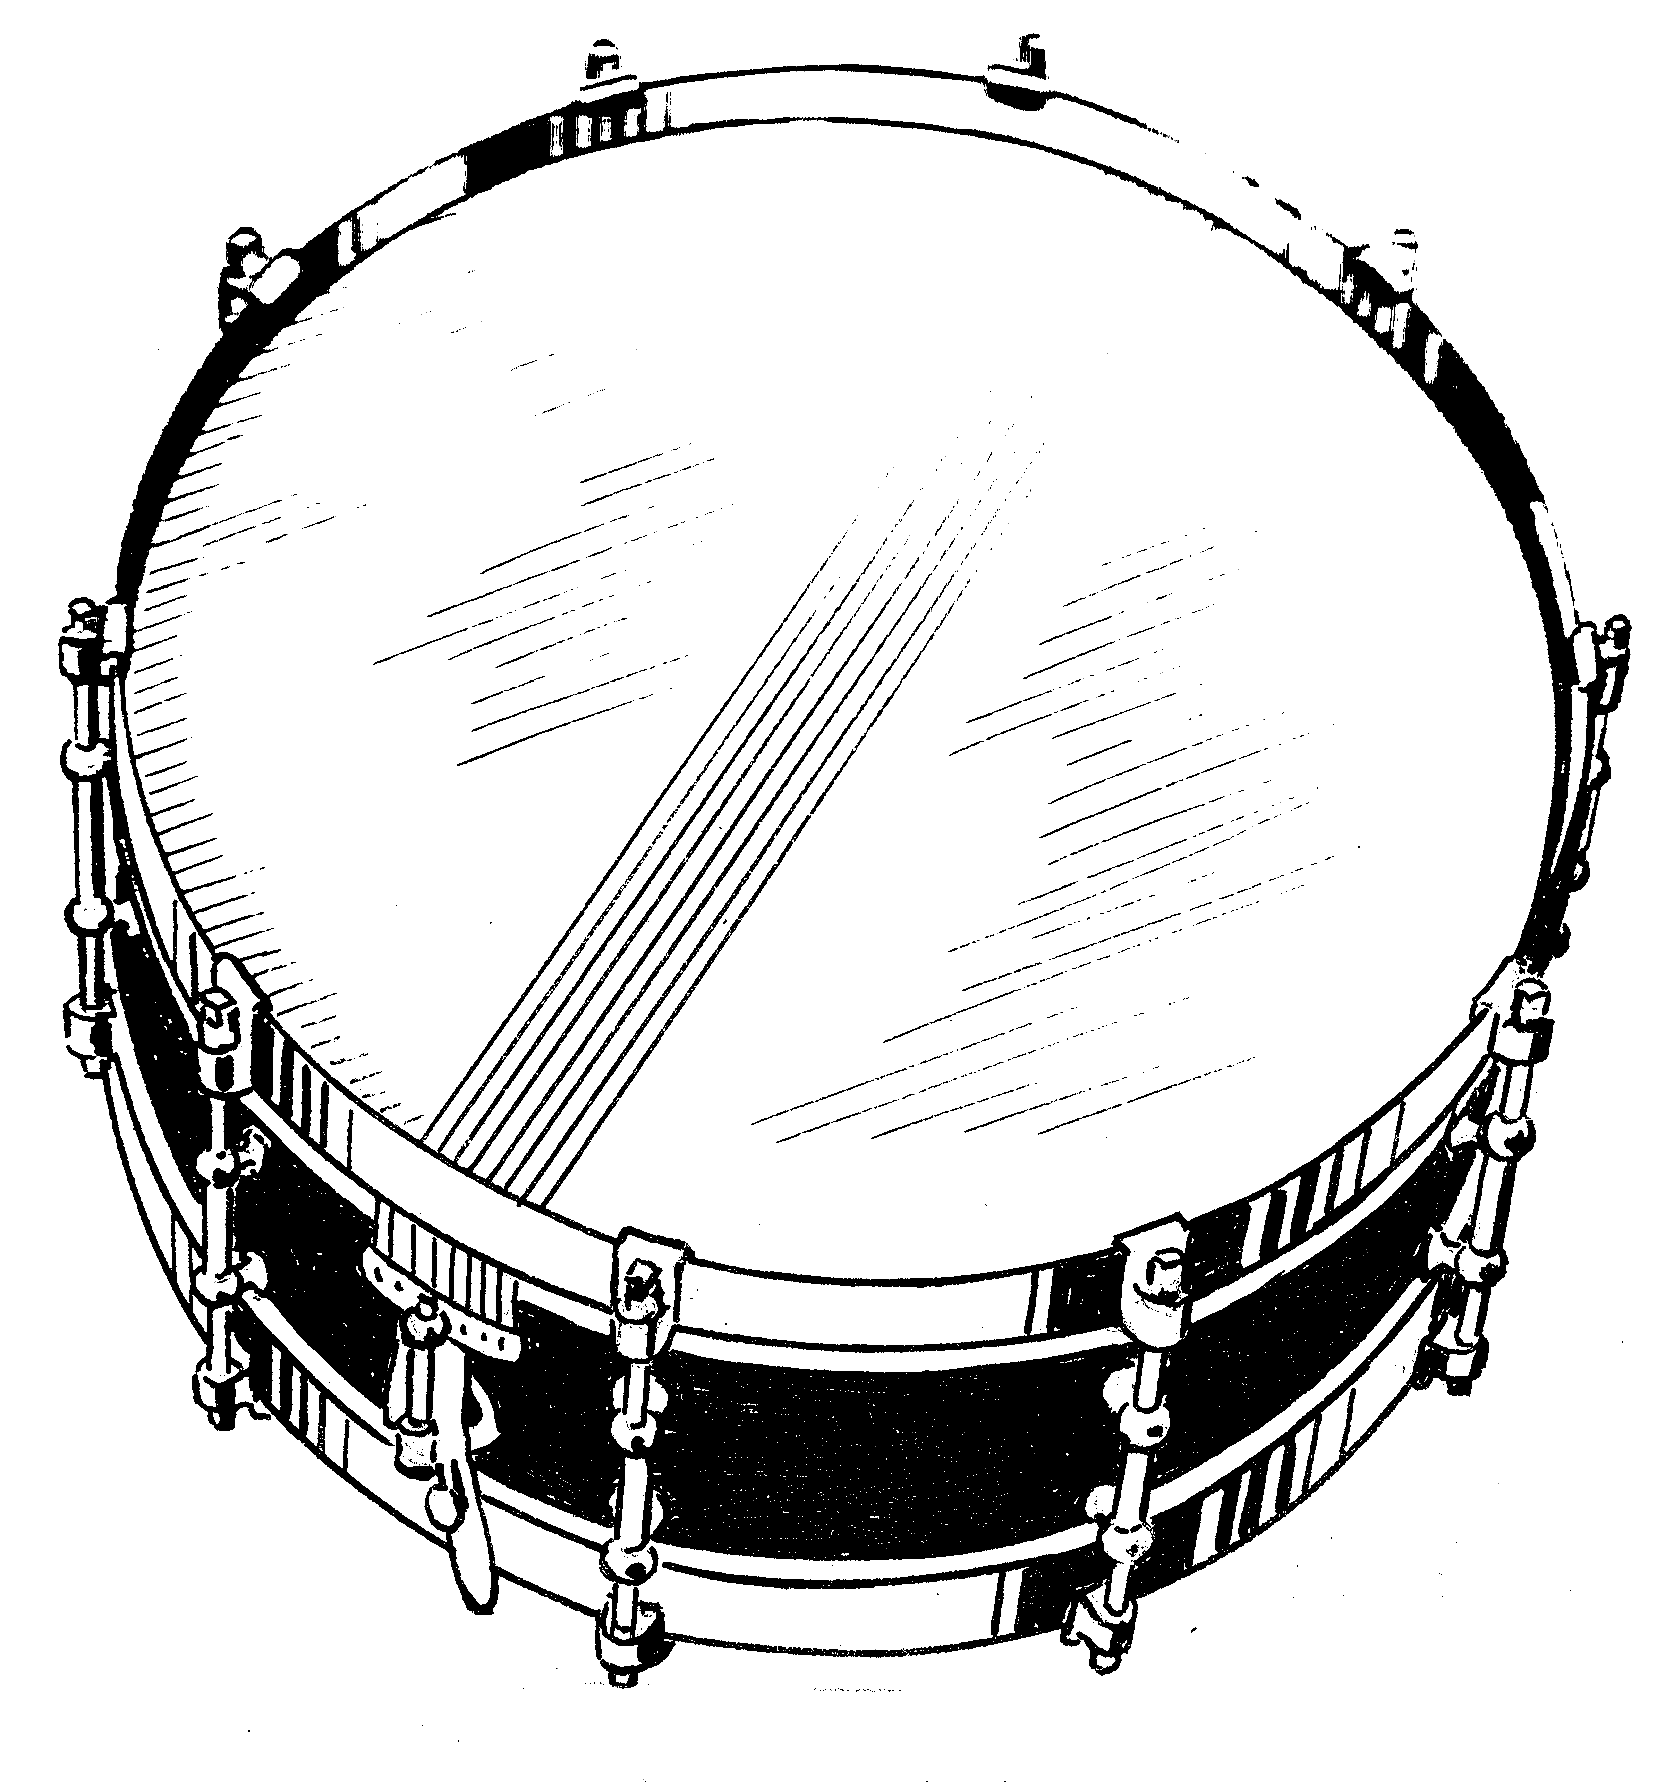 Snare Drum With White Lines S